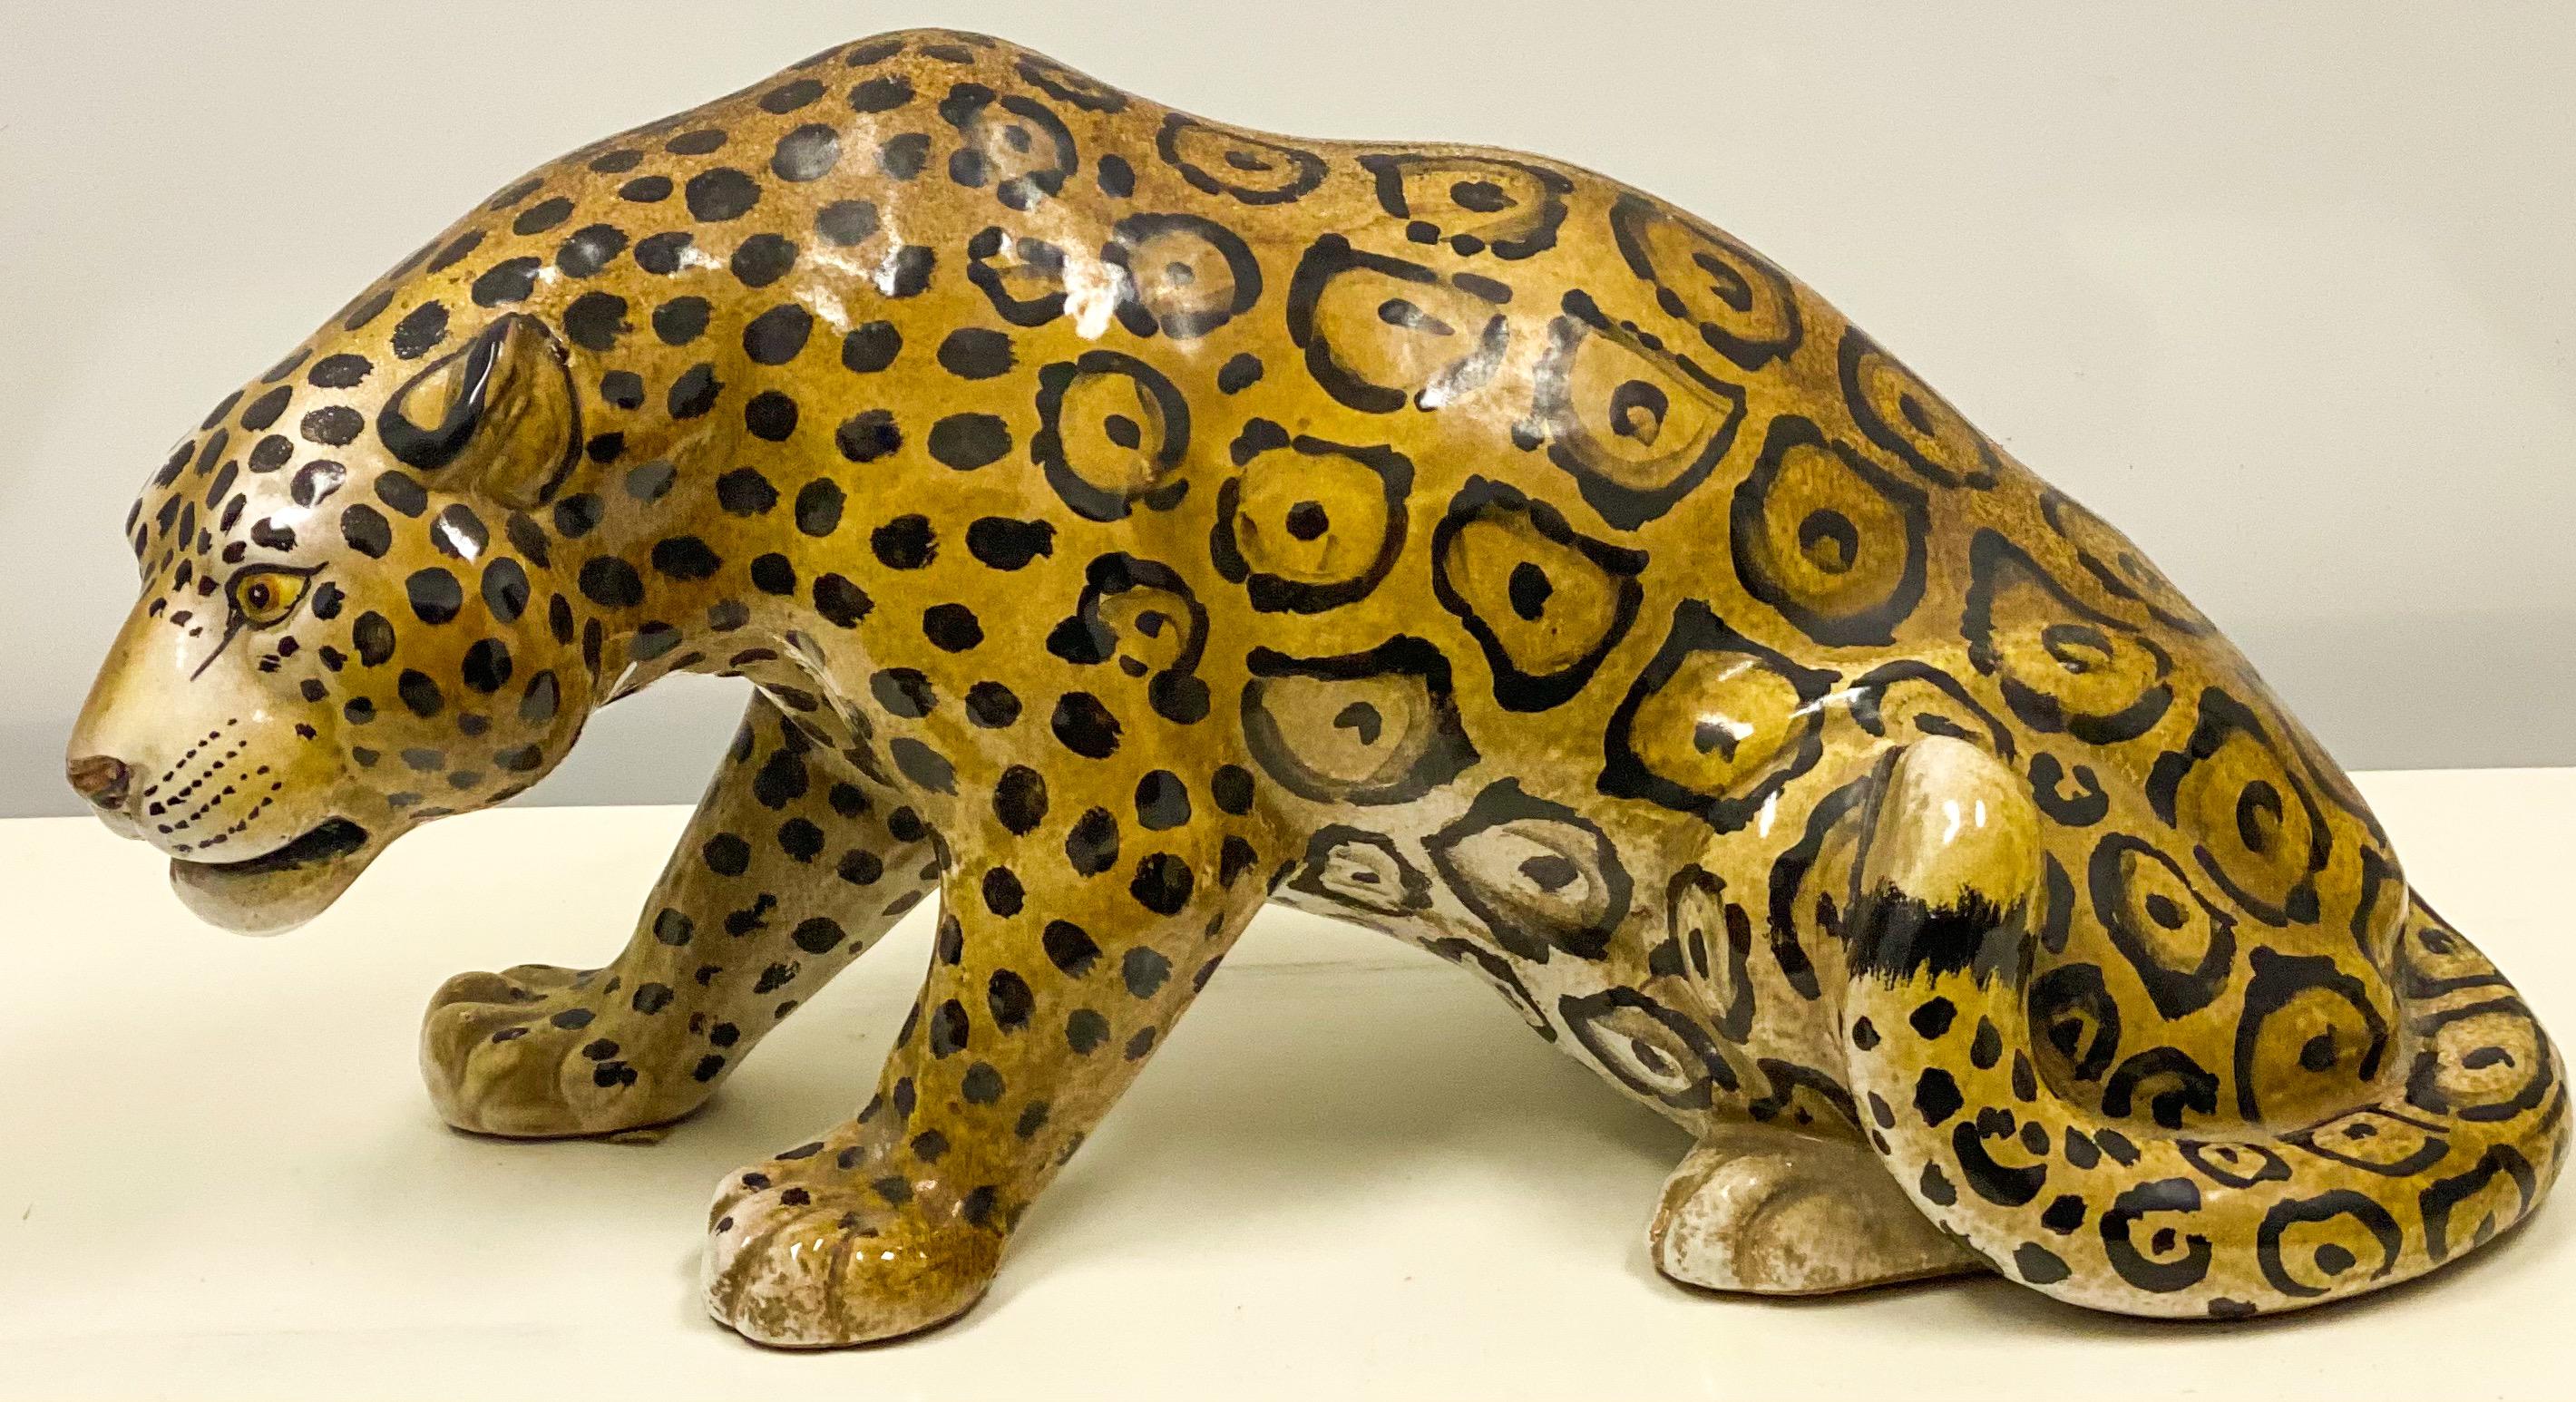 This is a large scale Hollywood Regency Era crouching Italian terracotta leopard figurine. He is in very good condition.